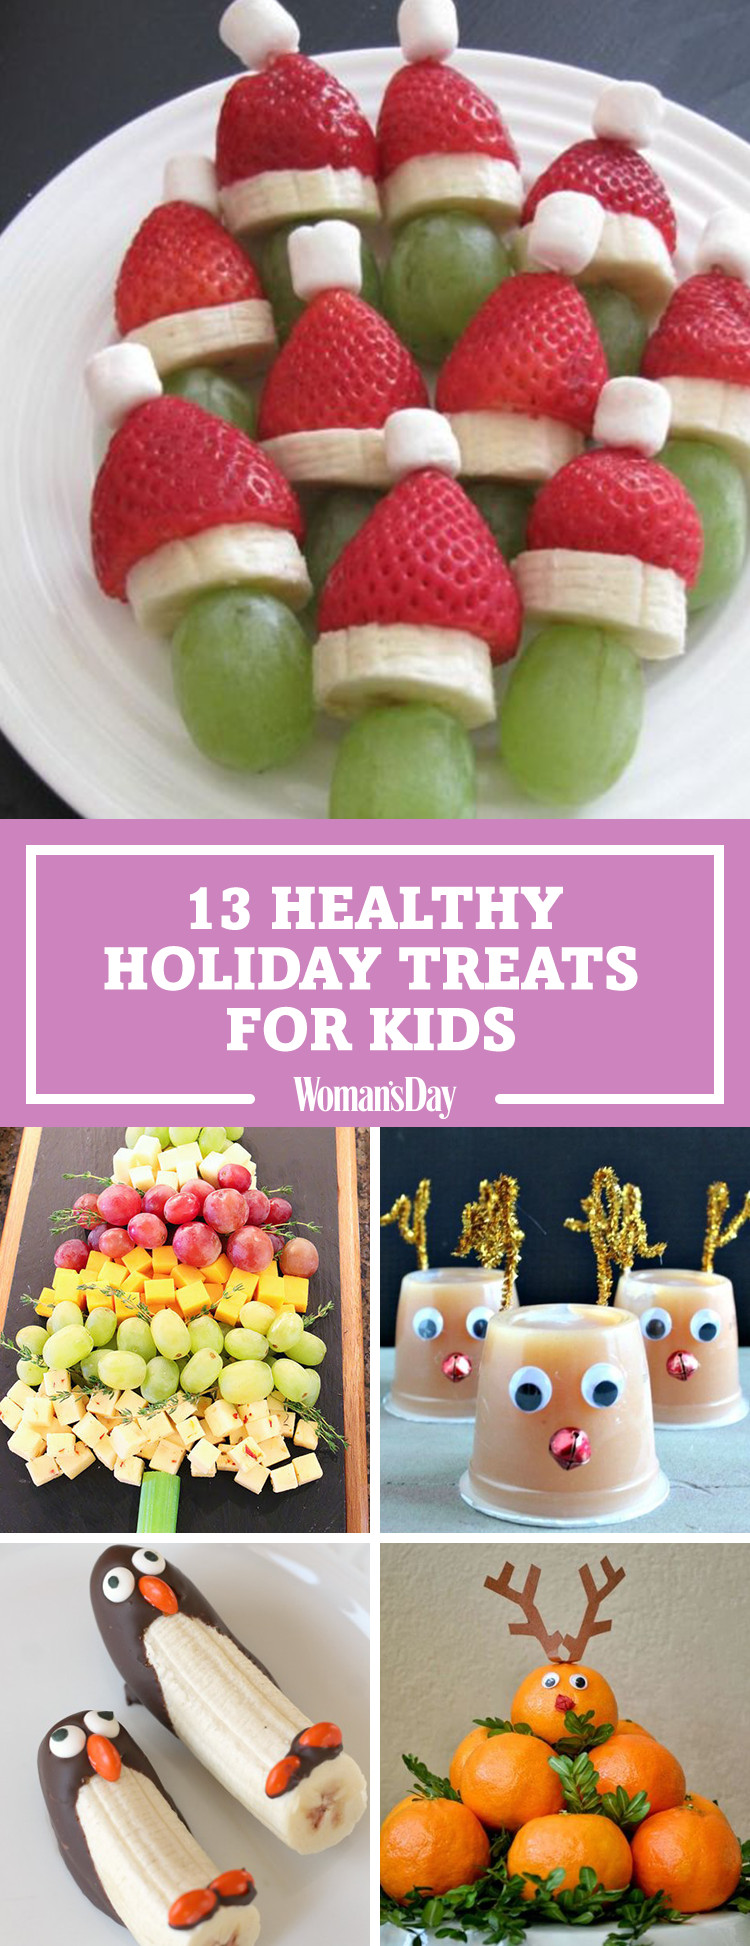 Healthy Christmas Snacks For Kids
 17 Healthy Christmas Snacks for Kids Easy Ideas for